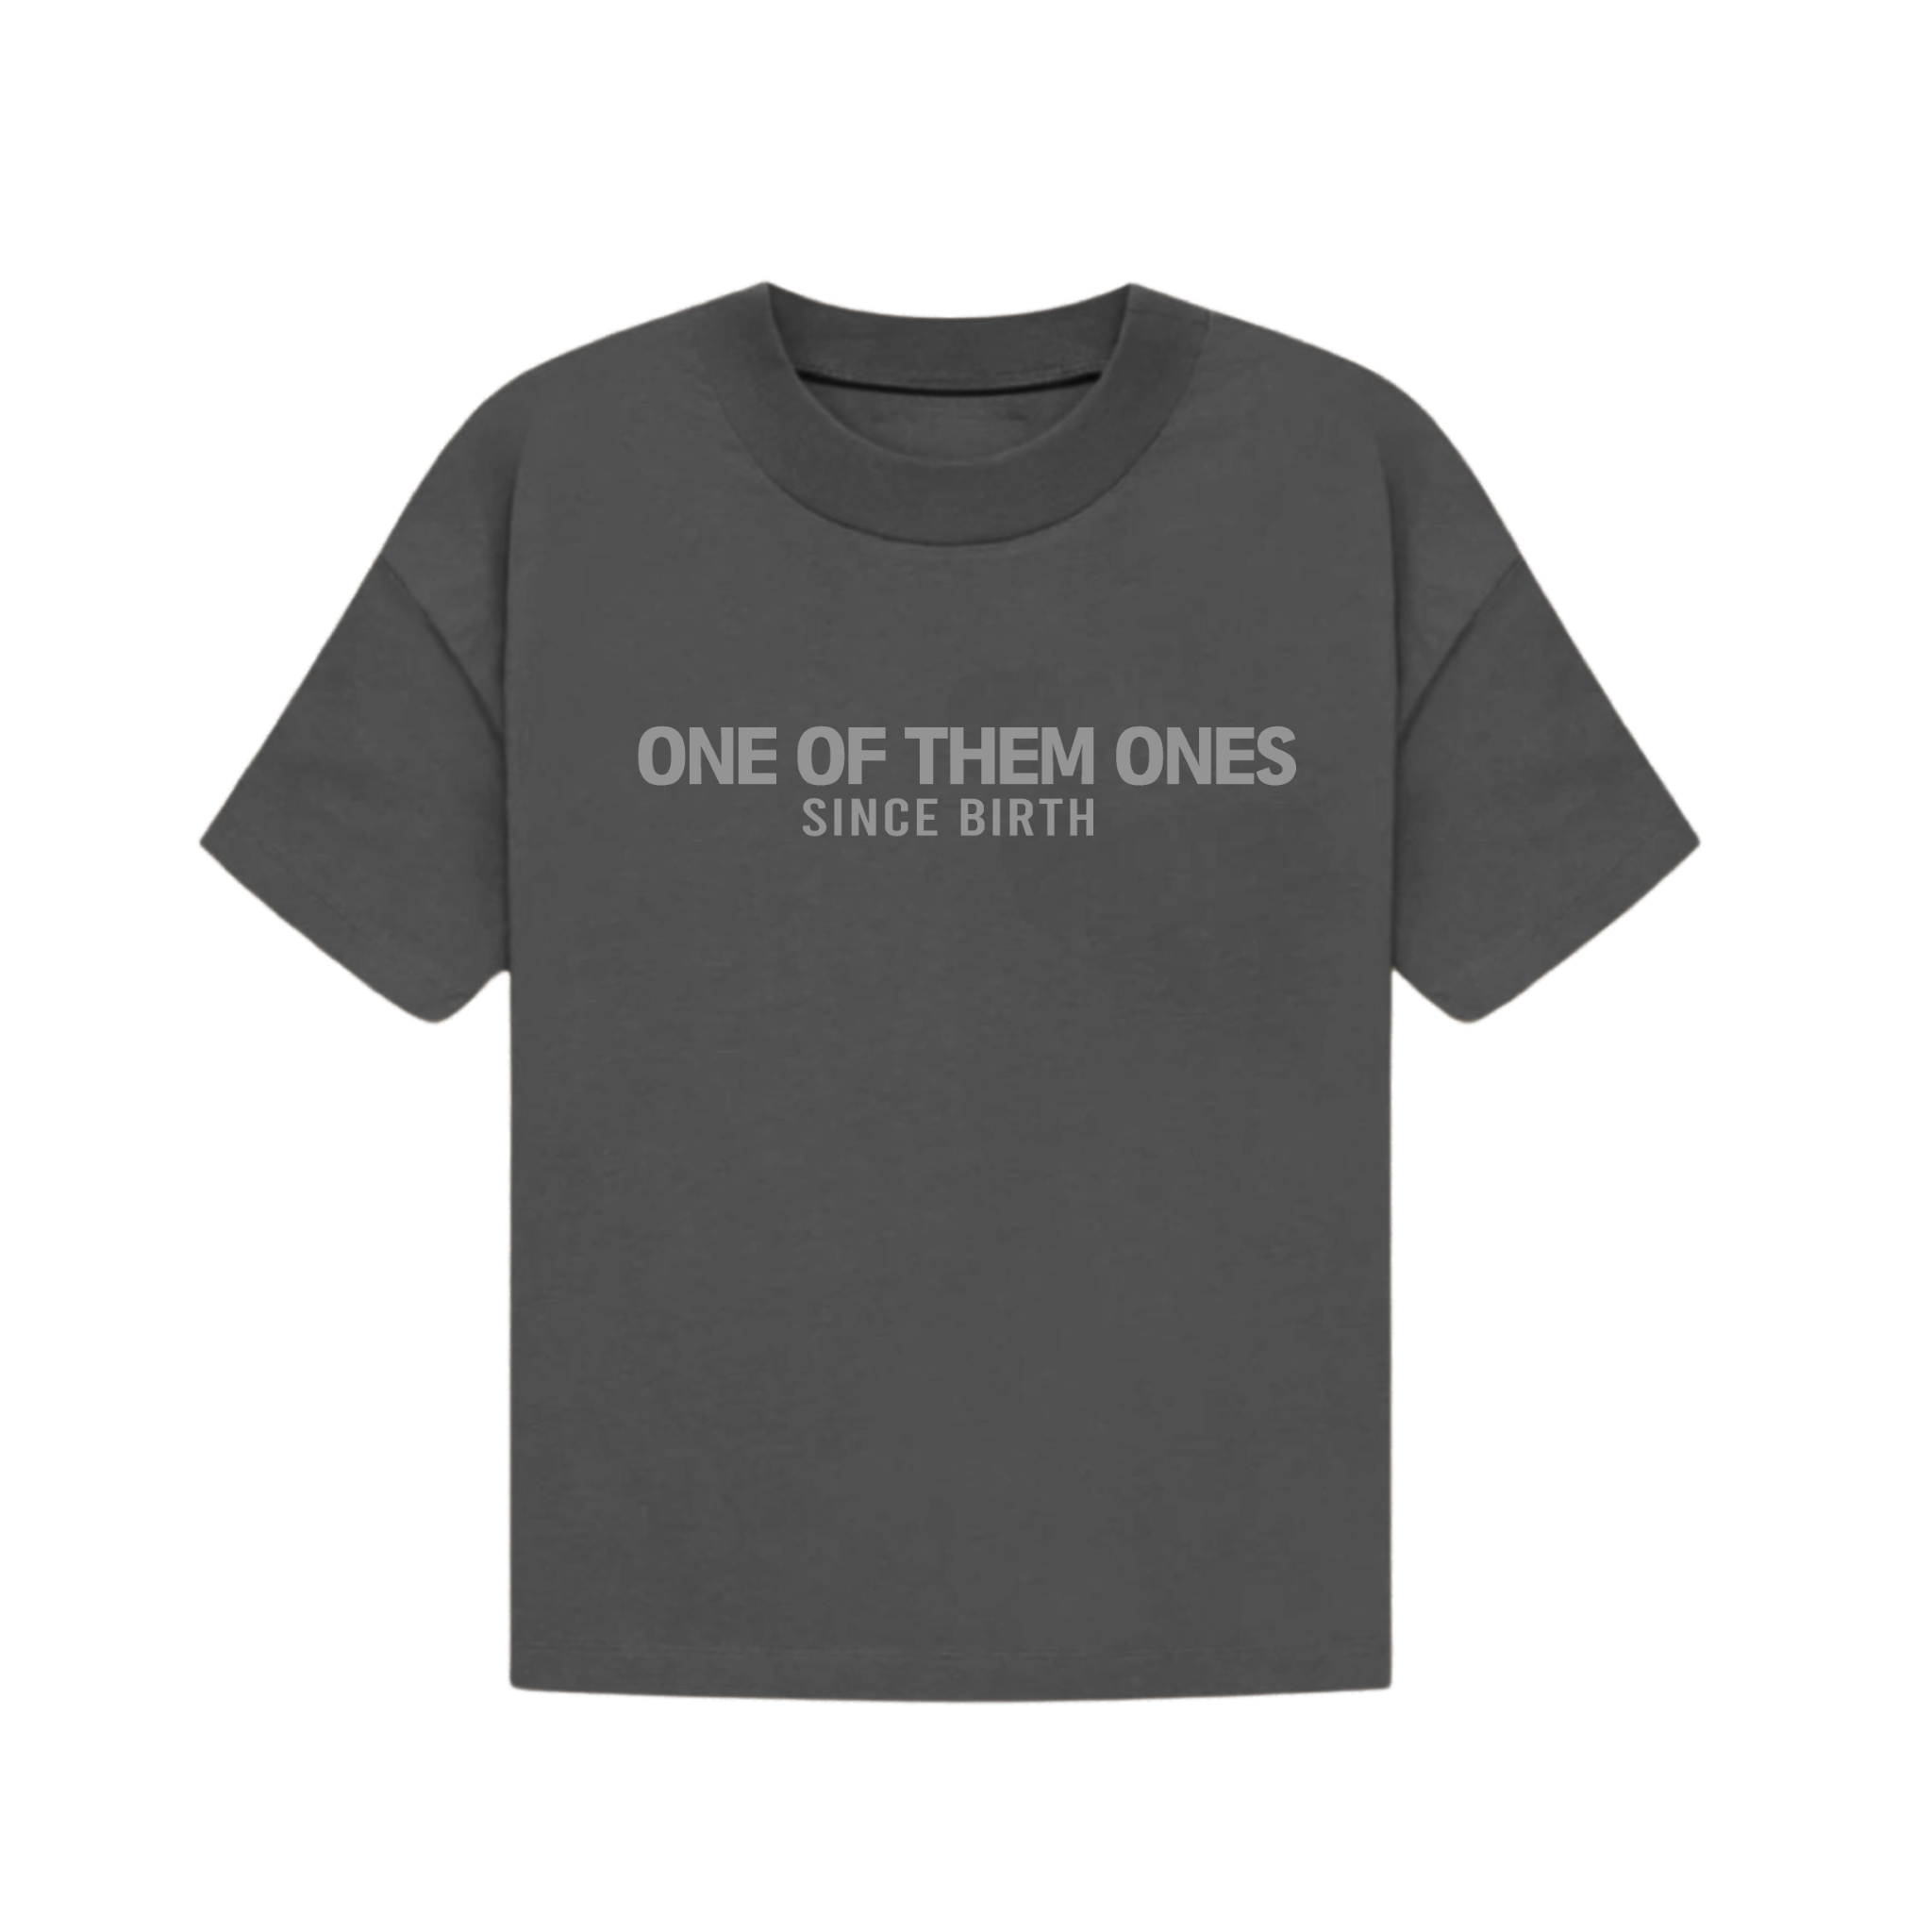 One Of Them Ones Since Birth - T-Shirt